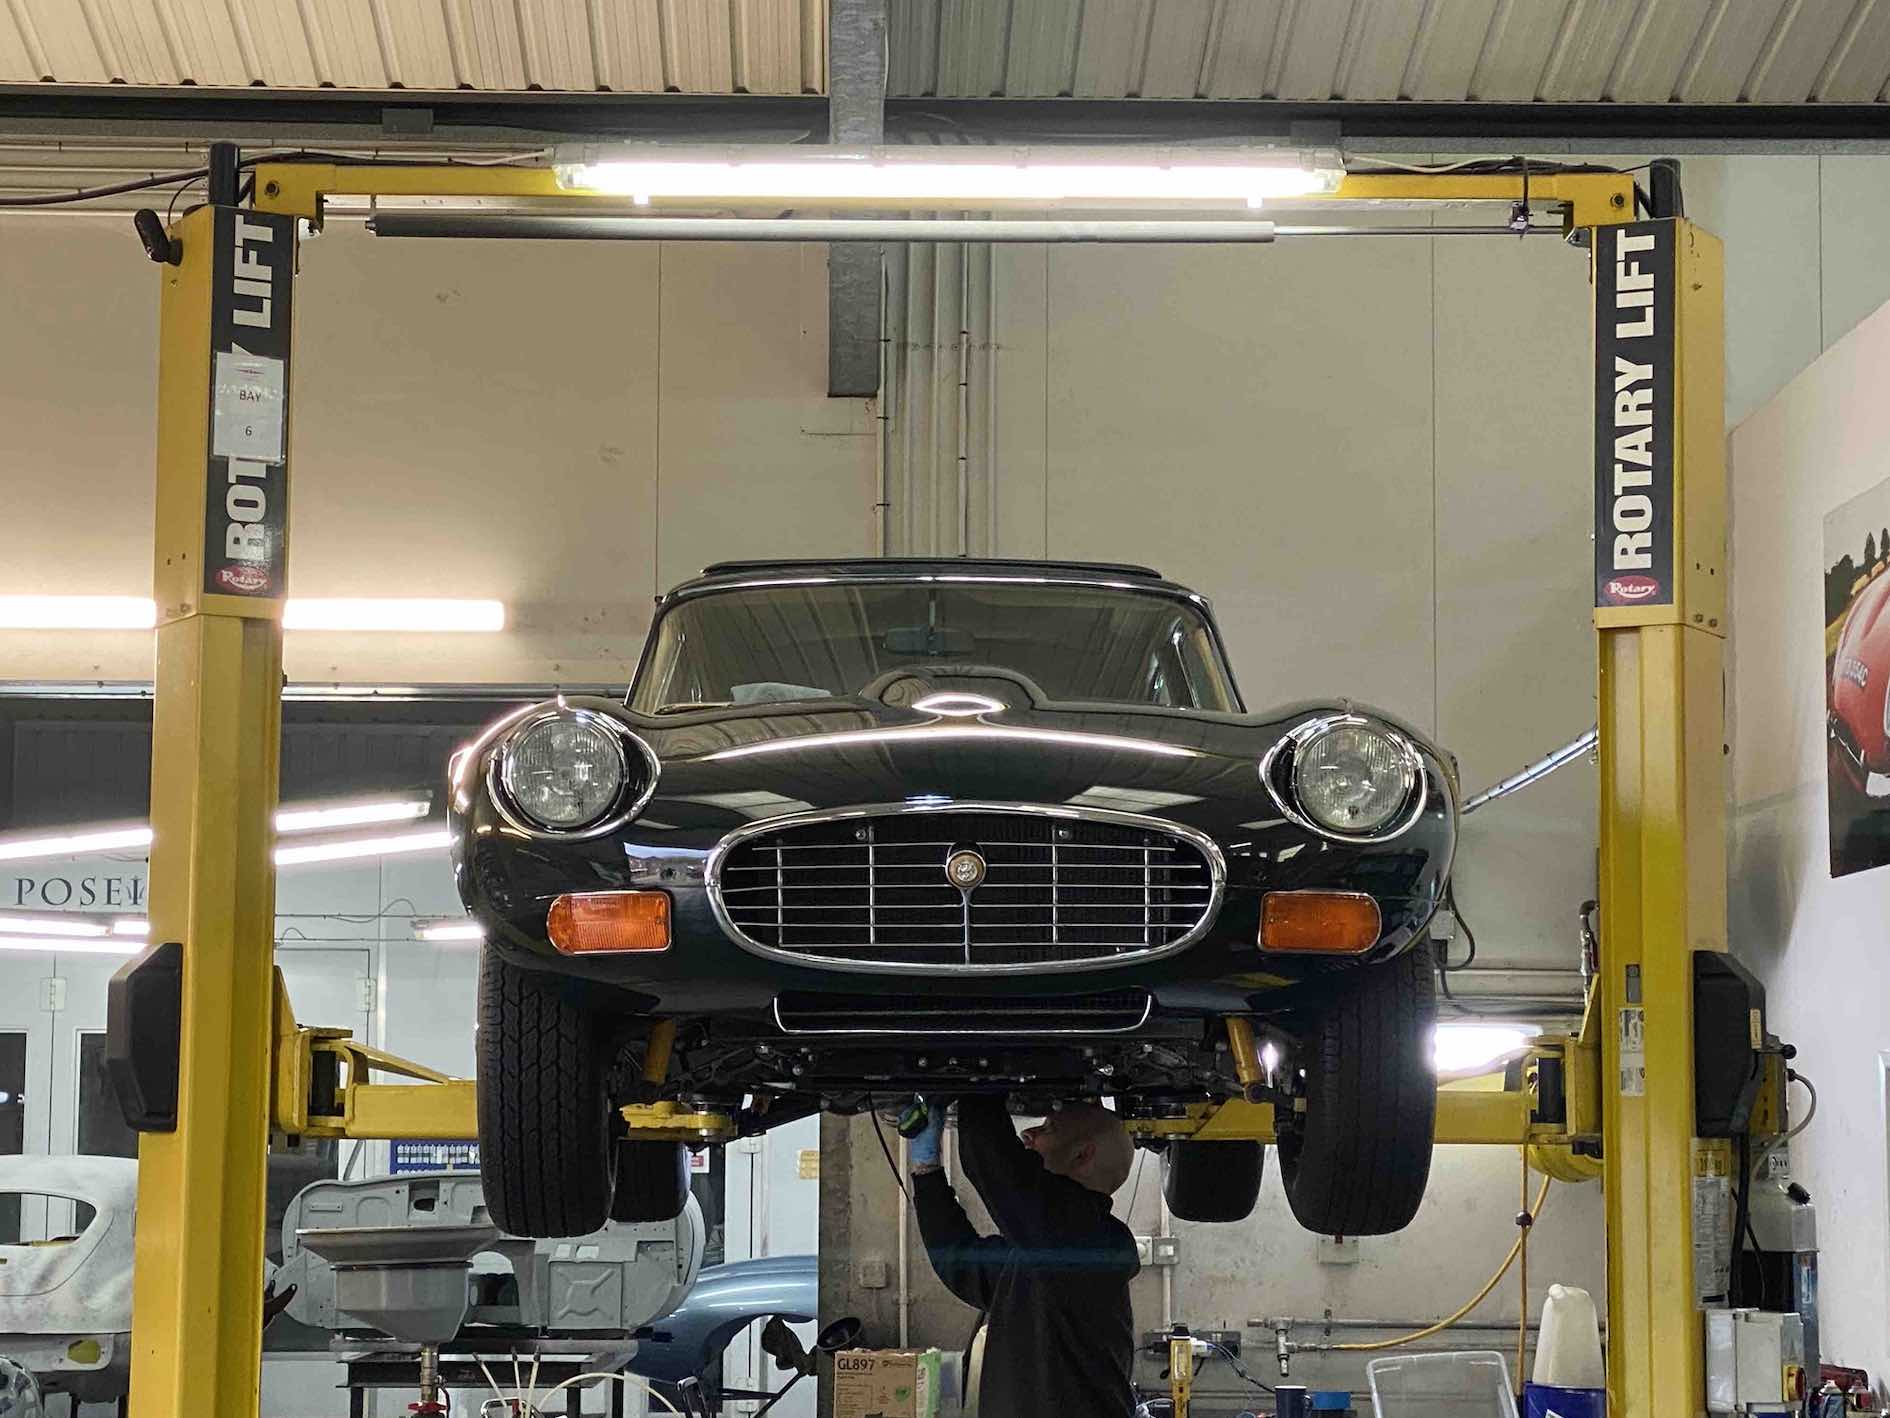 E-type uk Jaguar E-Type on hoist being worked on by mechanic